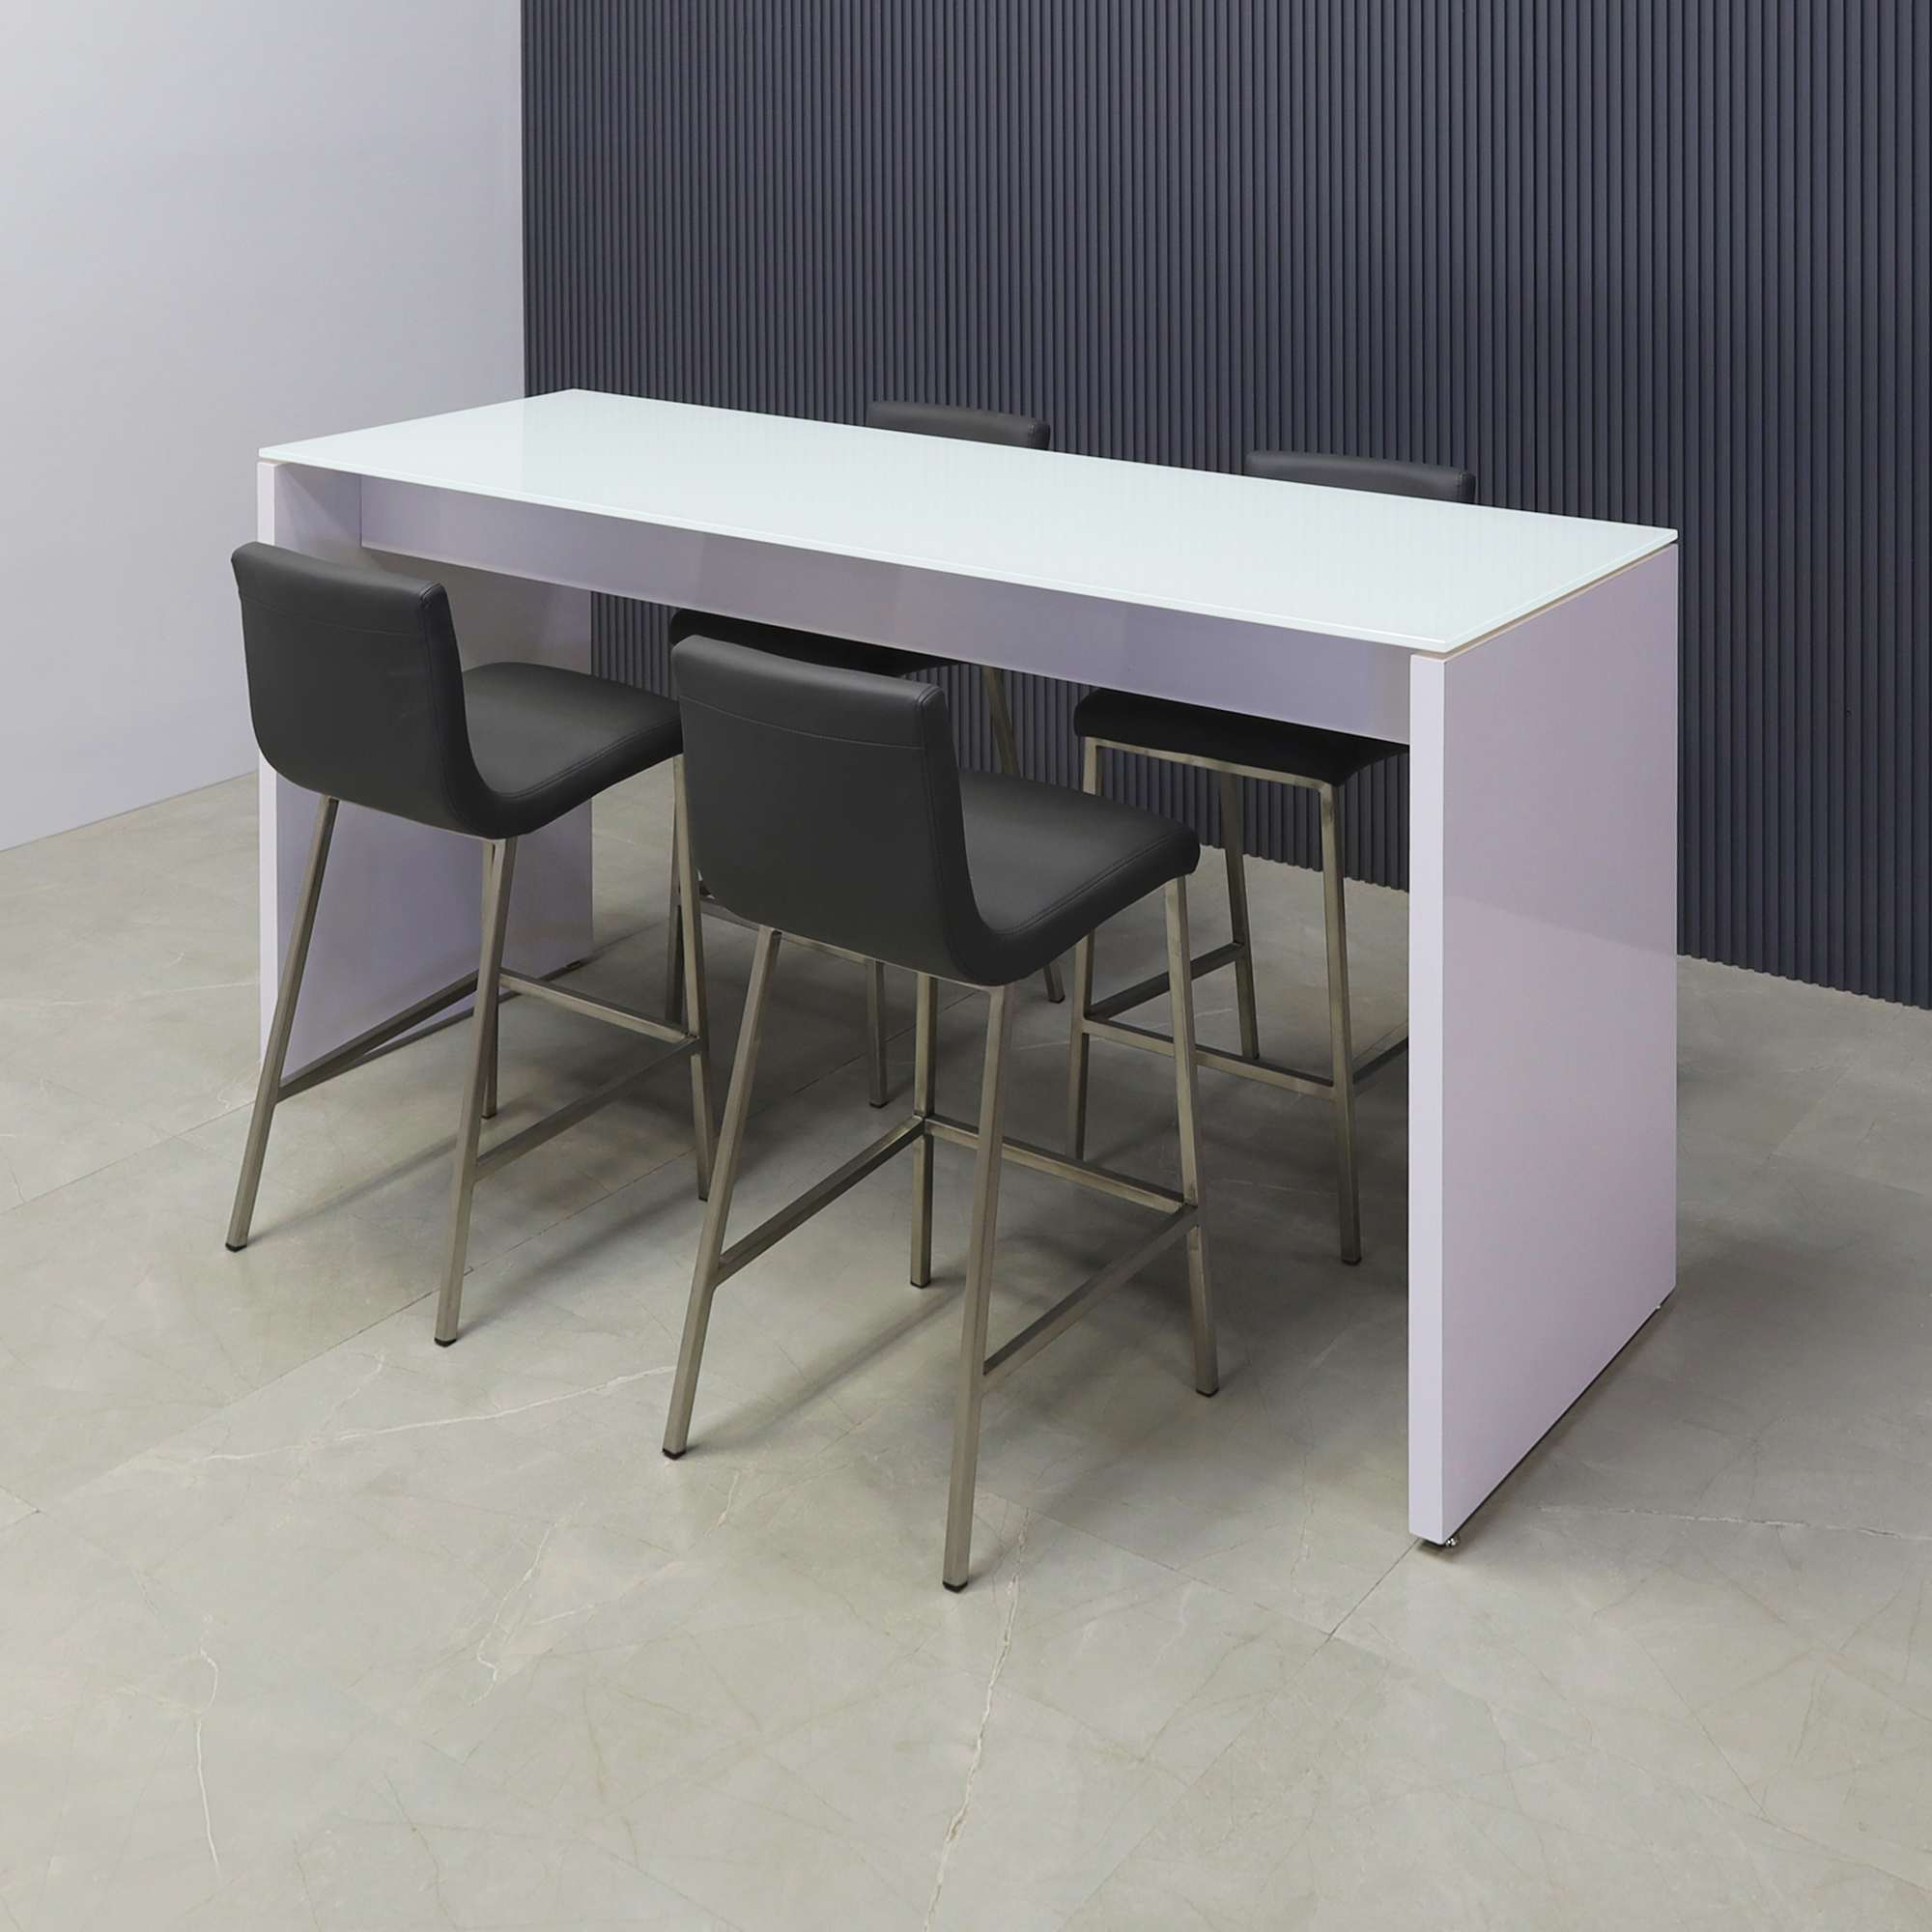 Ashville Tempered Glass Bar Table in white top and white gloss laminate base shown here.